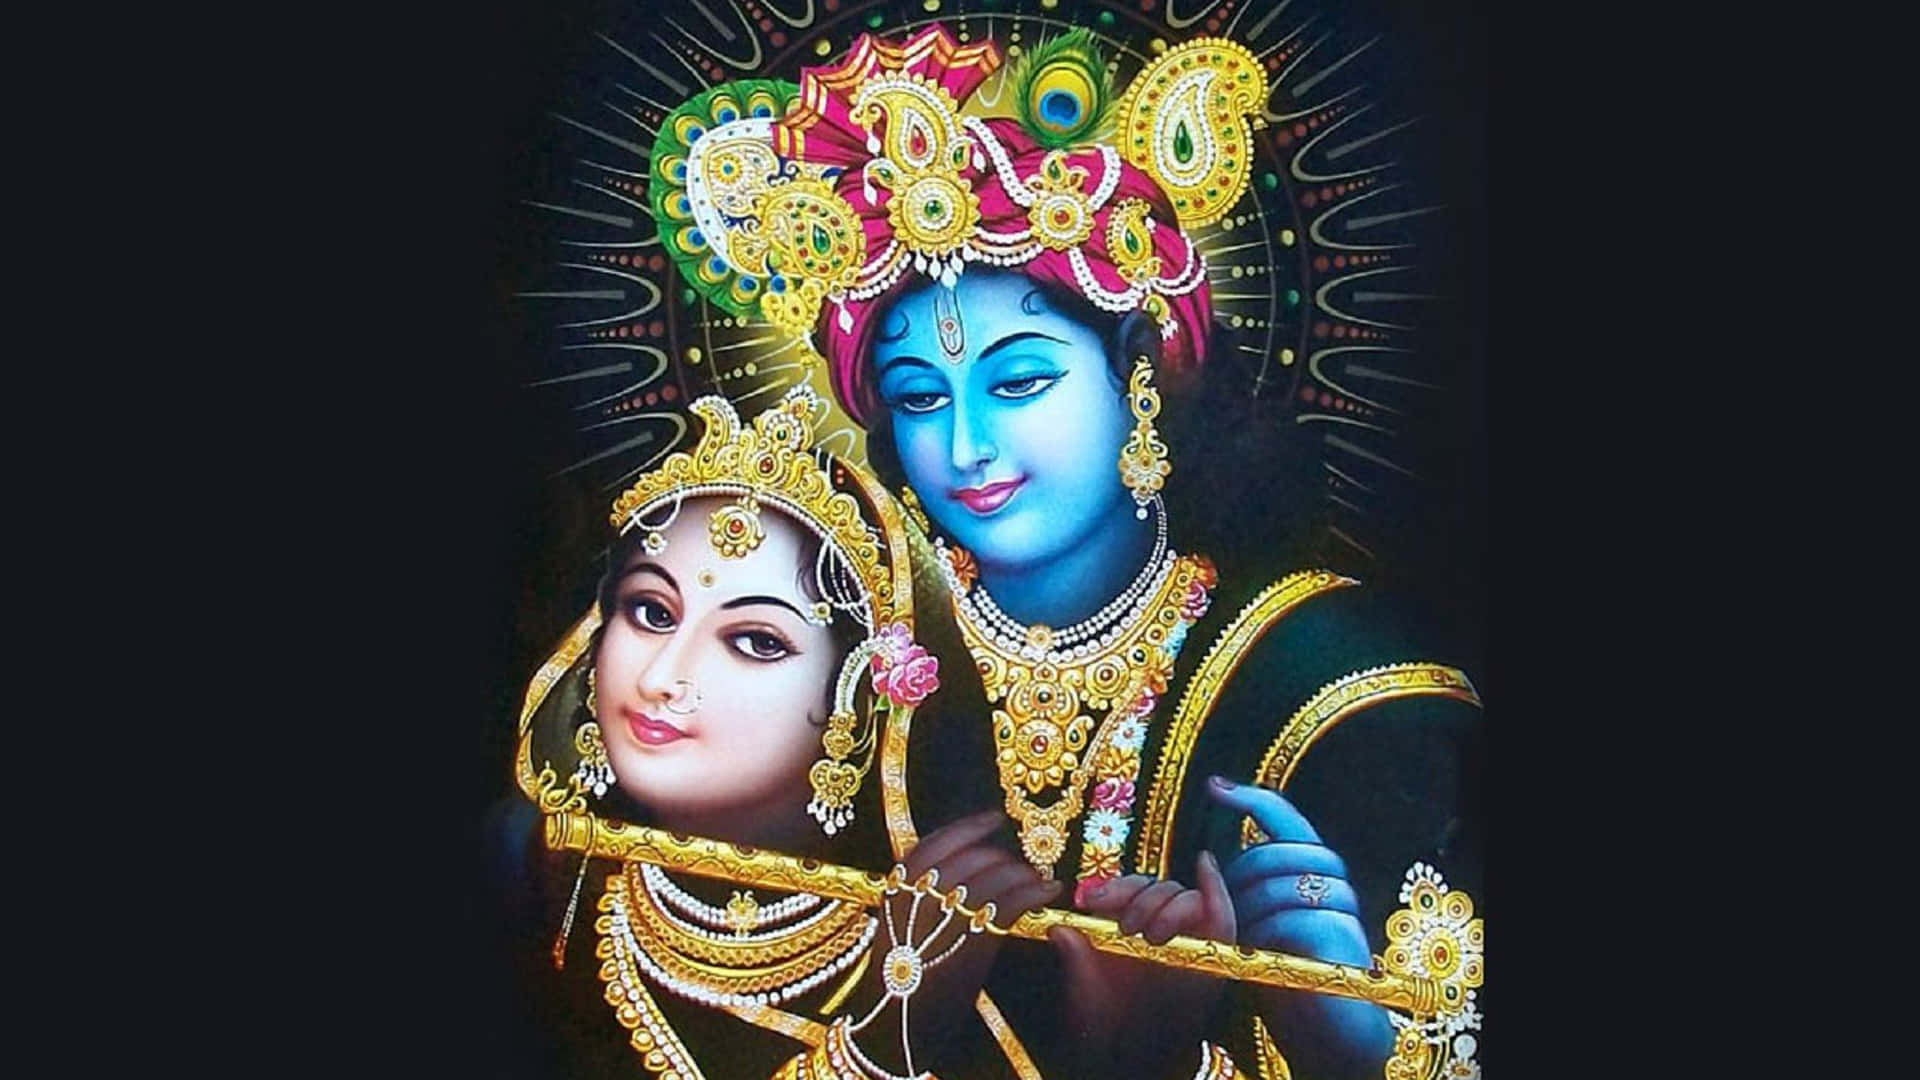 A Painting Of Lord Krishna And Lord Rama